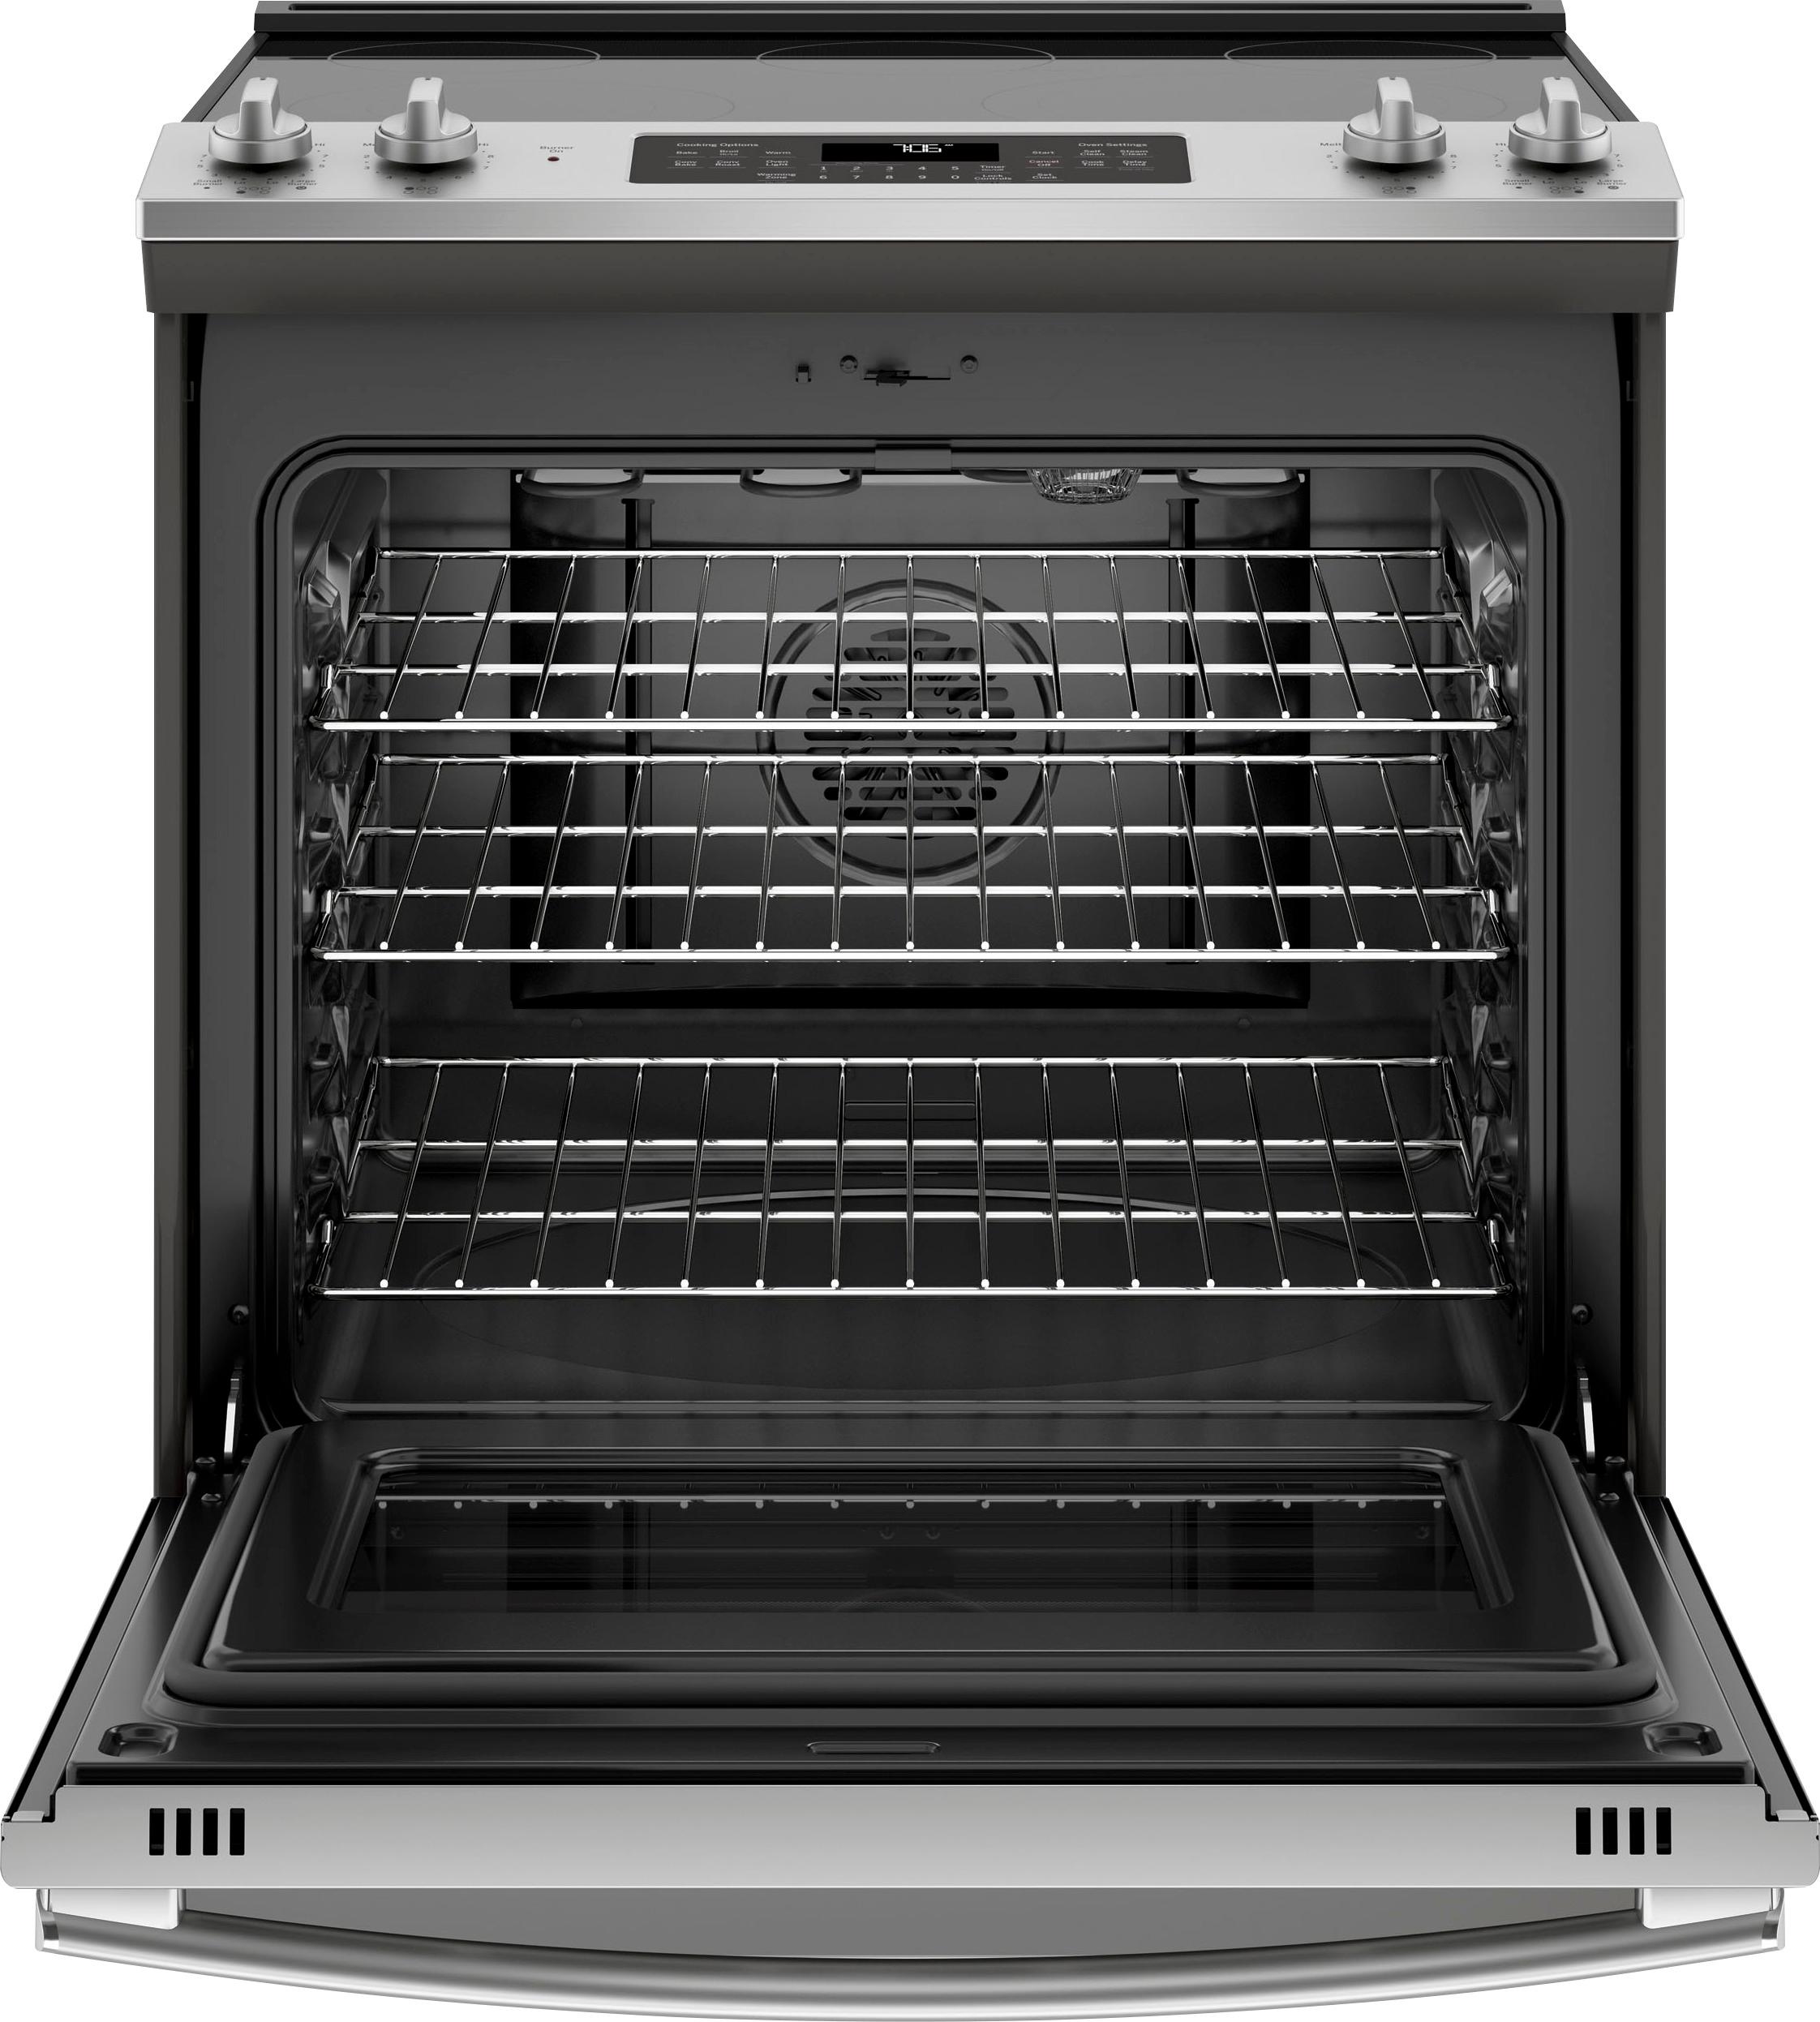 Angle View: GE - 5.3 Cu. Ft. Self-Cleaning Slide-In Electric Range - White